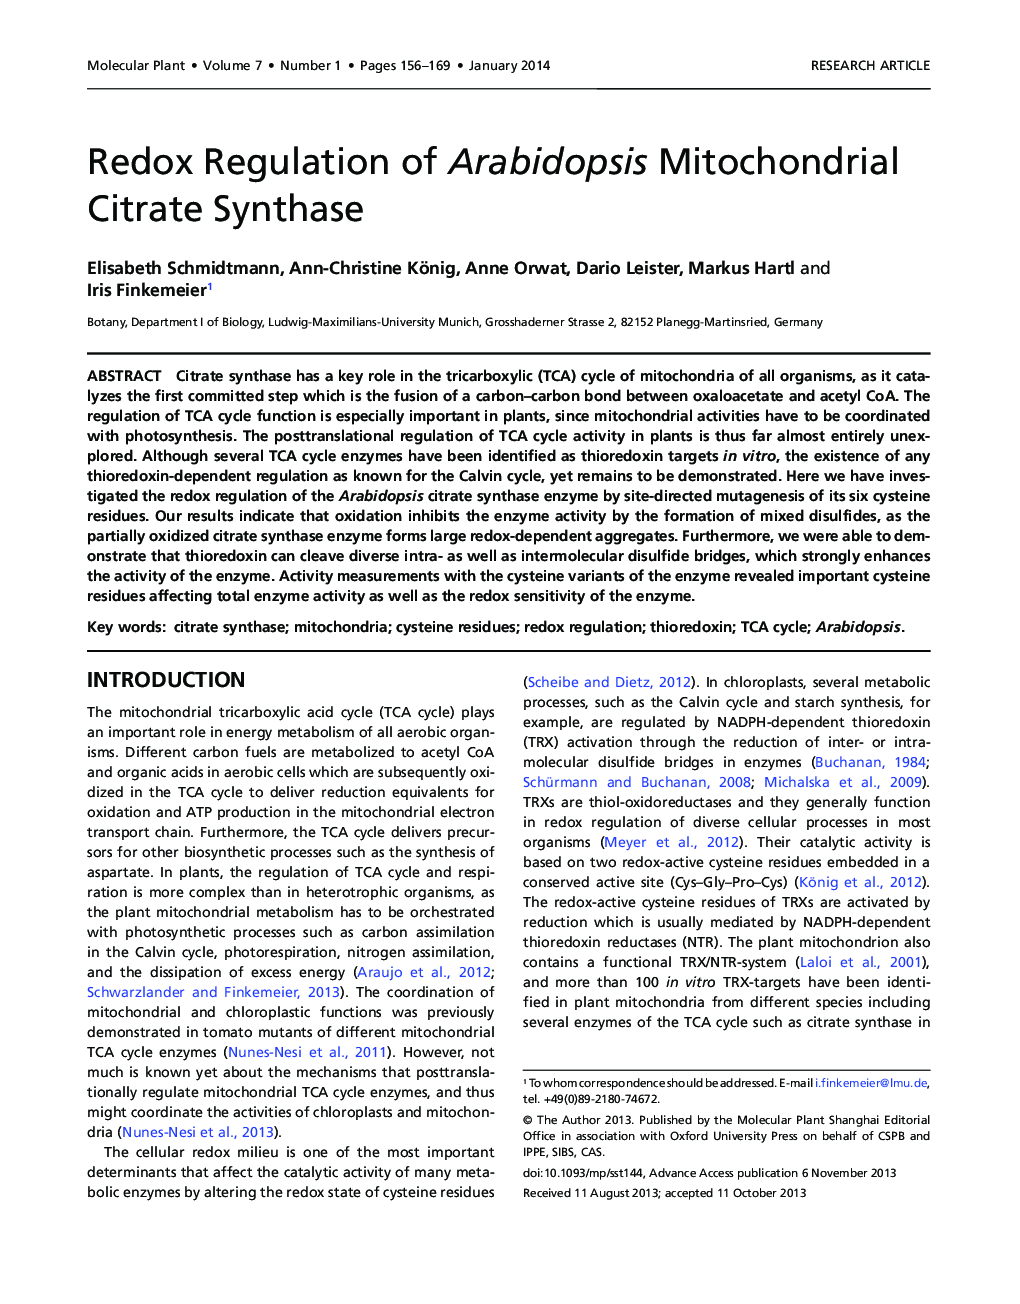 Redox Regulation of Arabidopsis Mitochondrial Citrate Synthase 